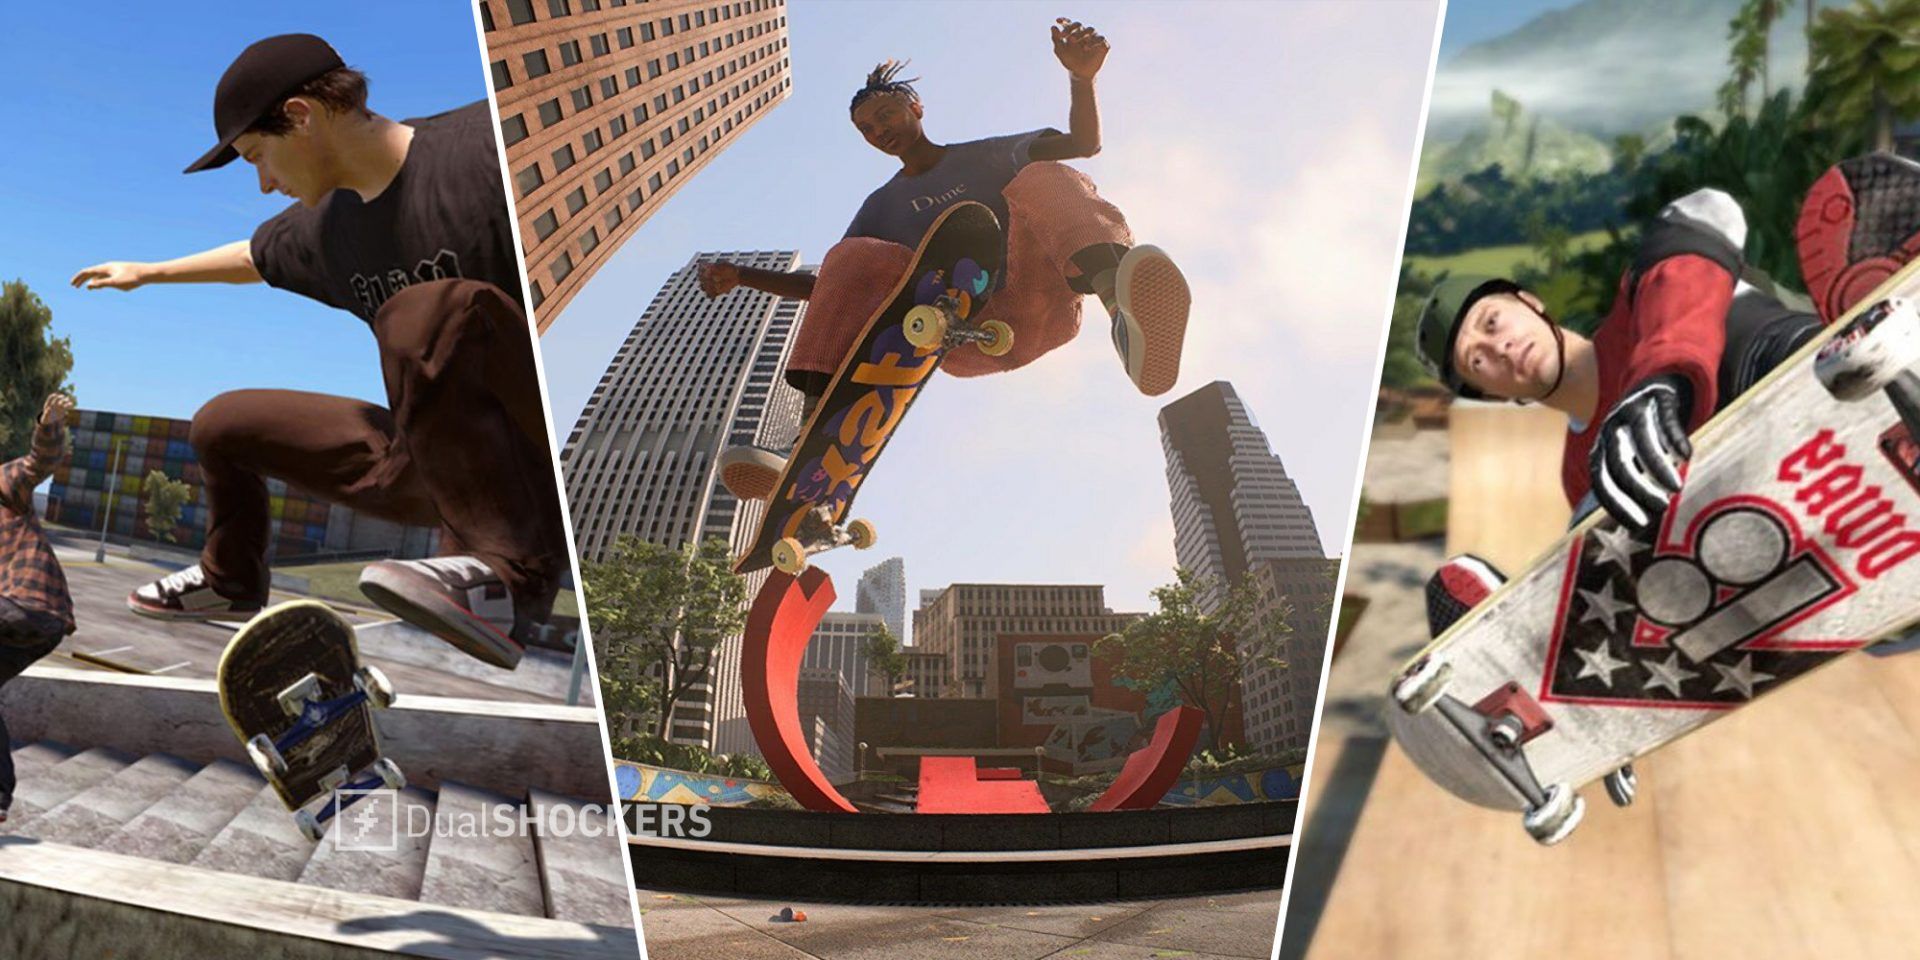 Skate 3 player doing a trick on left, Skate 4 gameplay in middle, Skate 3 player on a vert ramp on right